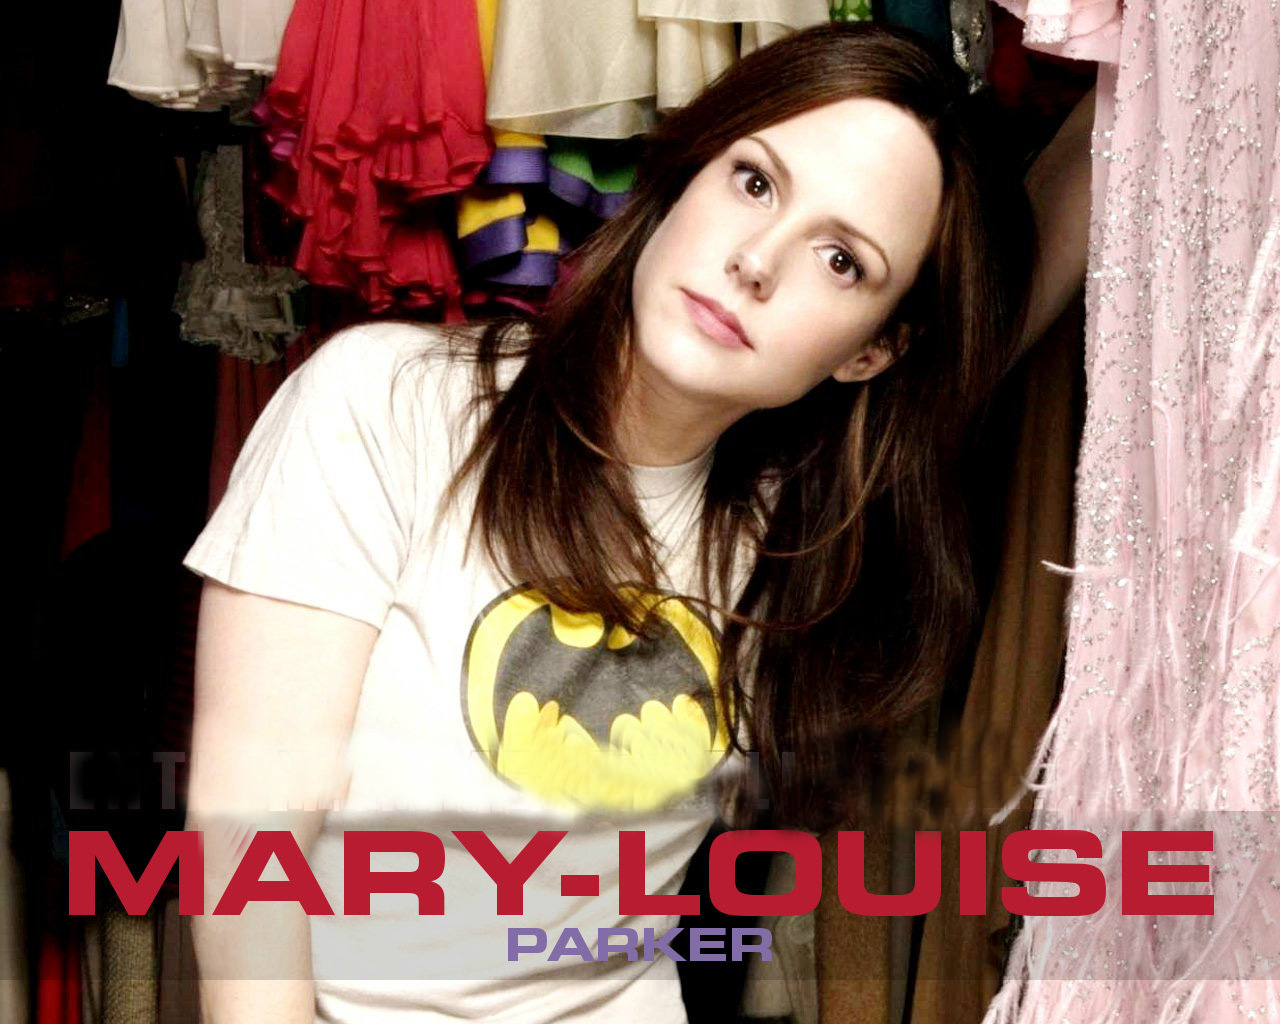 Mary Louise Parker Images. | Mary Louise Parker | Wallpaper 7of 11 | Mary Louise Parker Images.